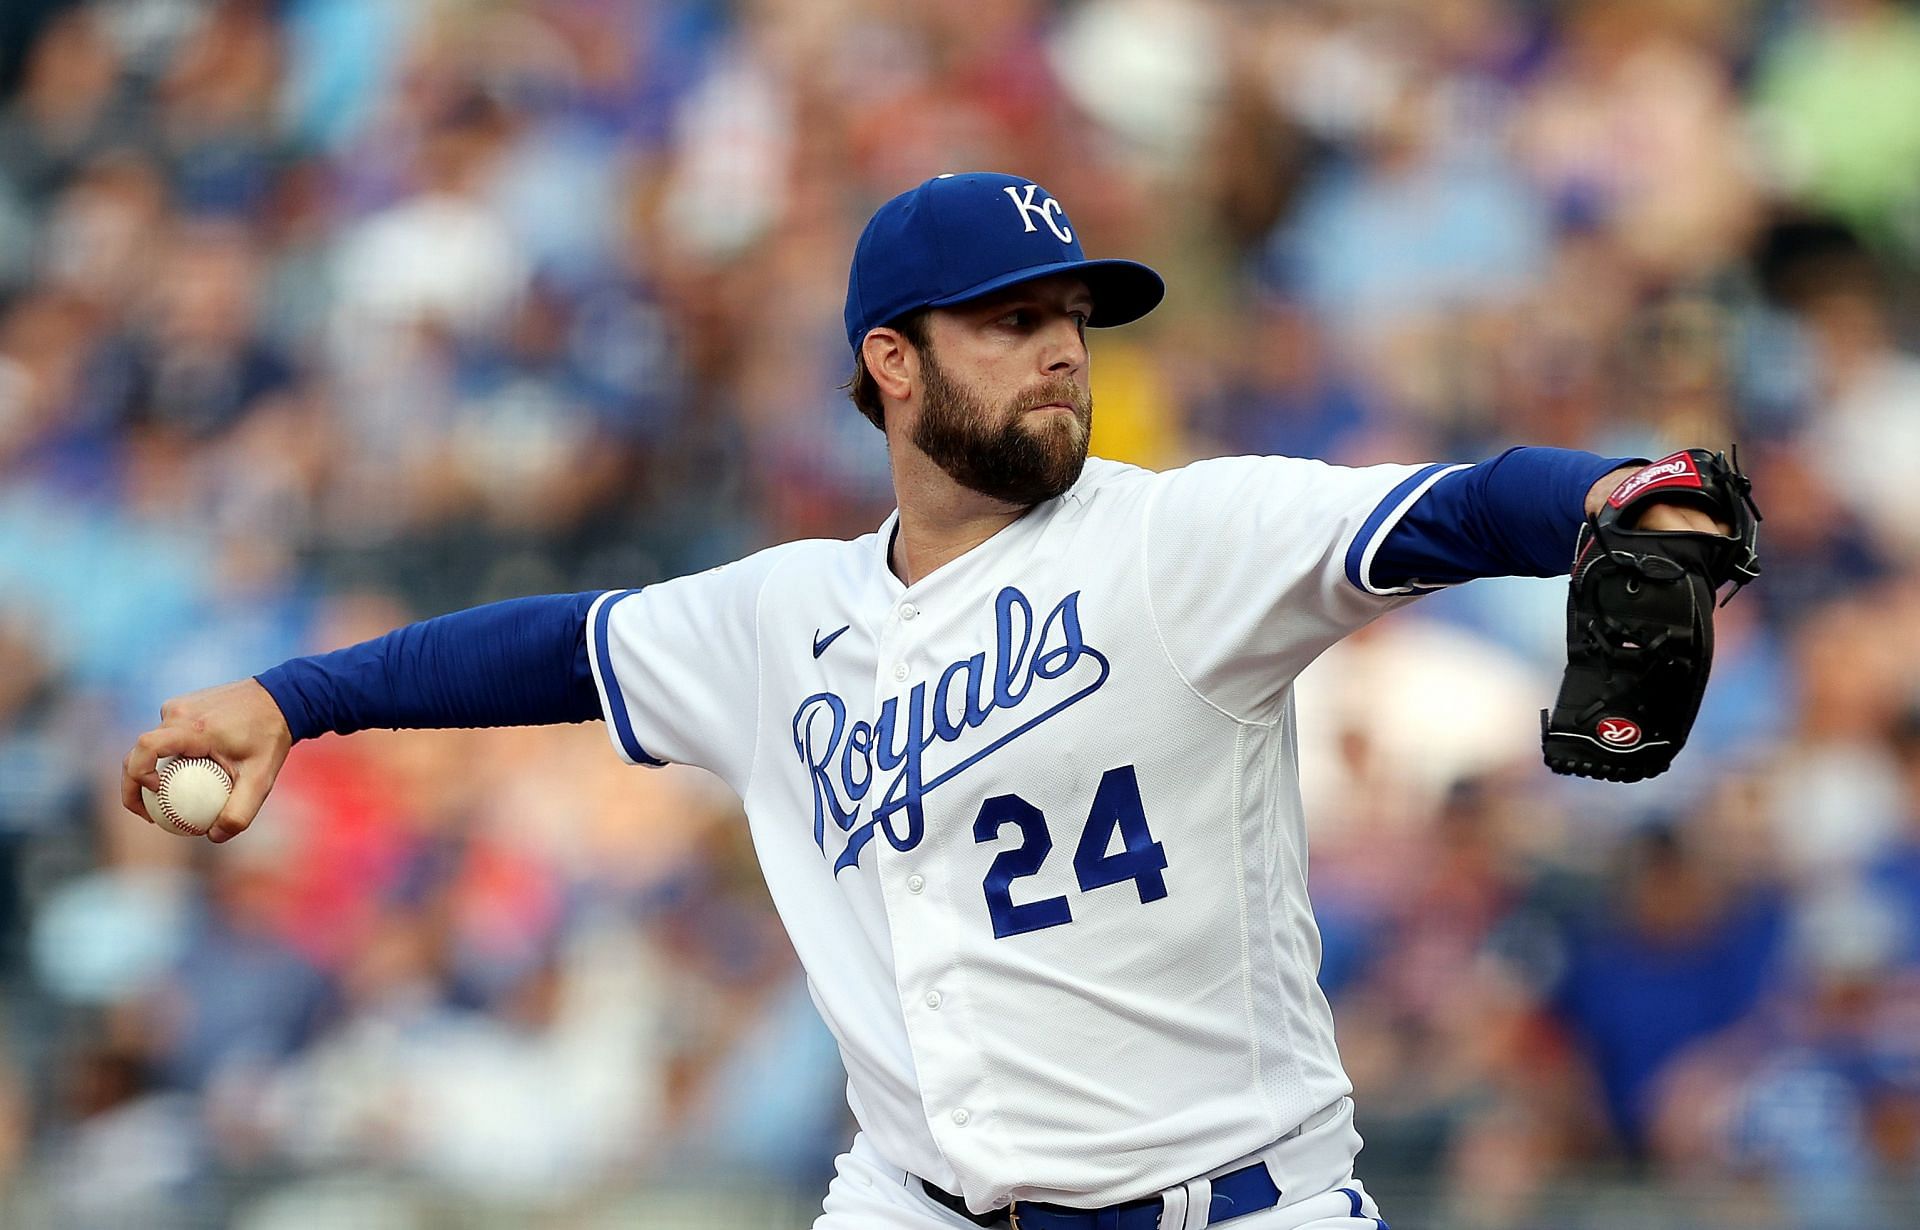 Starting pitcher Jordan Lyles of the Kansas City Royals pitches during the first inning against the Detroit Tigers at Kauffman Stadium on Monday in Kansas City, Missouri.